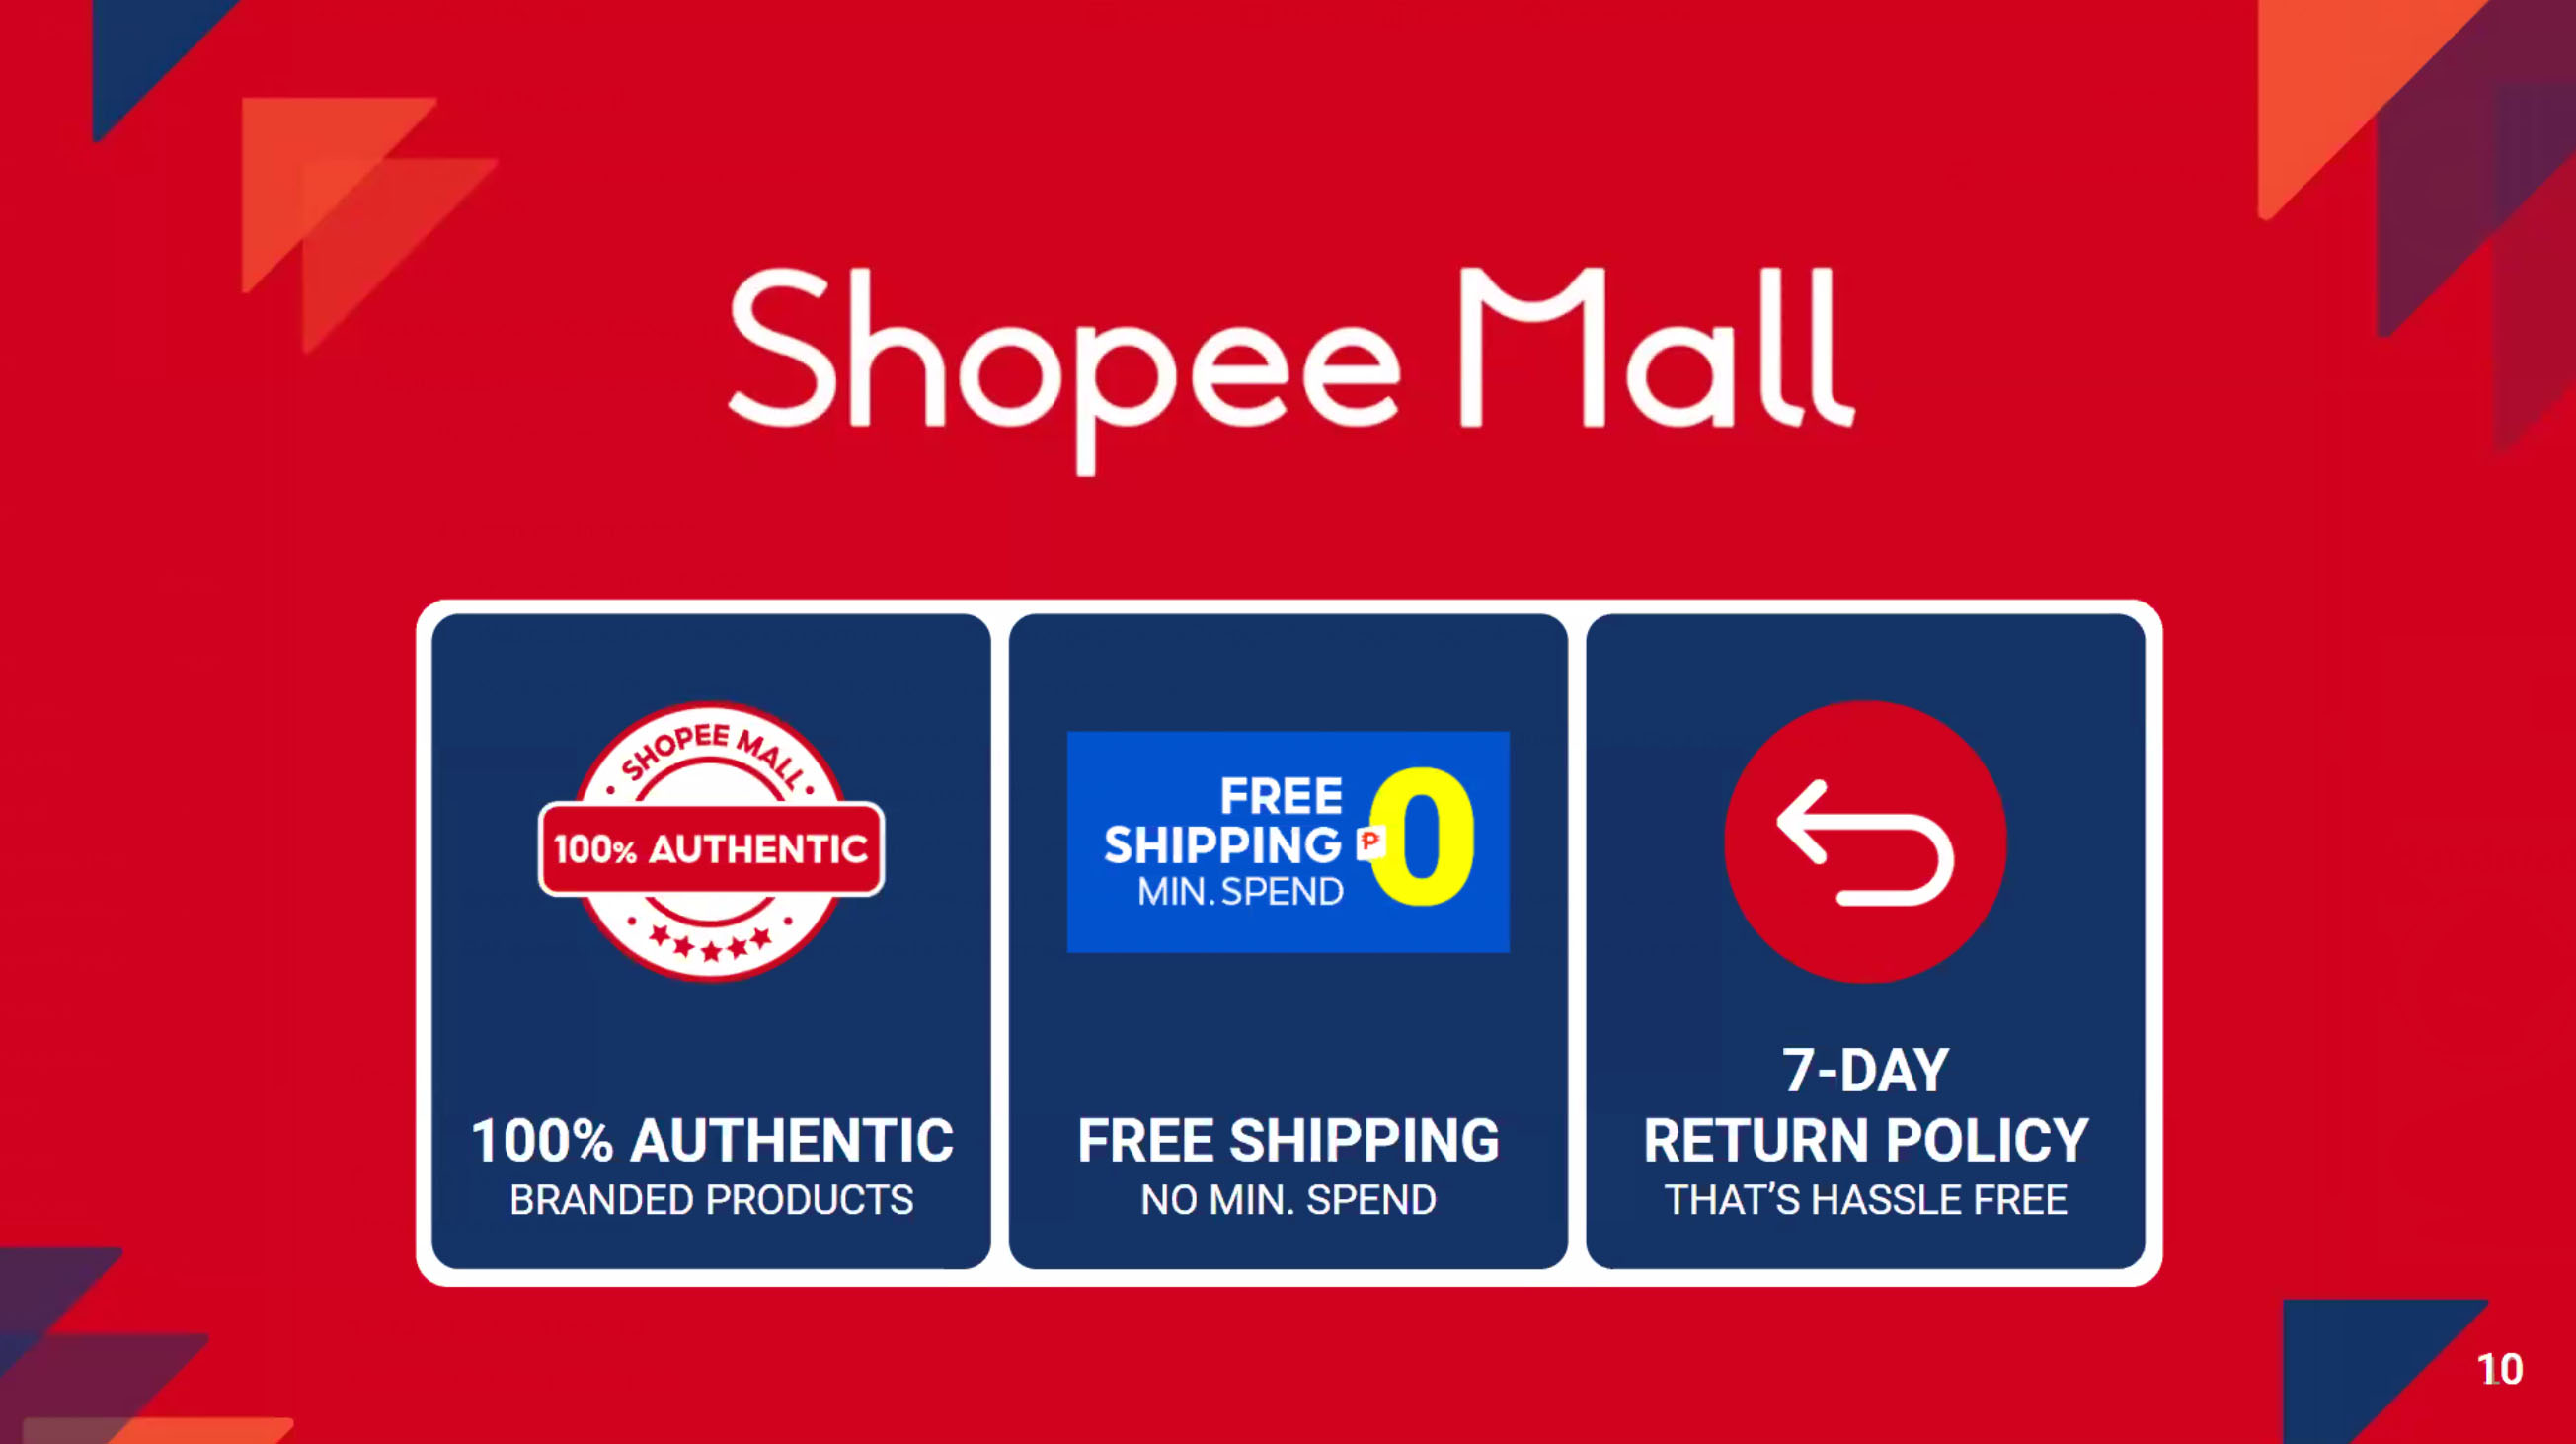 Shopee 10.10 Brands Festival offers free shipping, big discounts